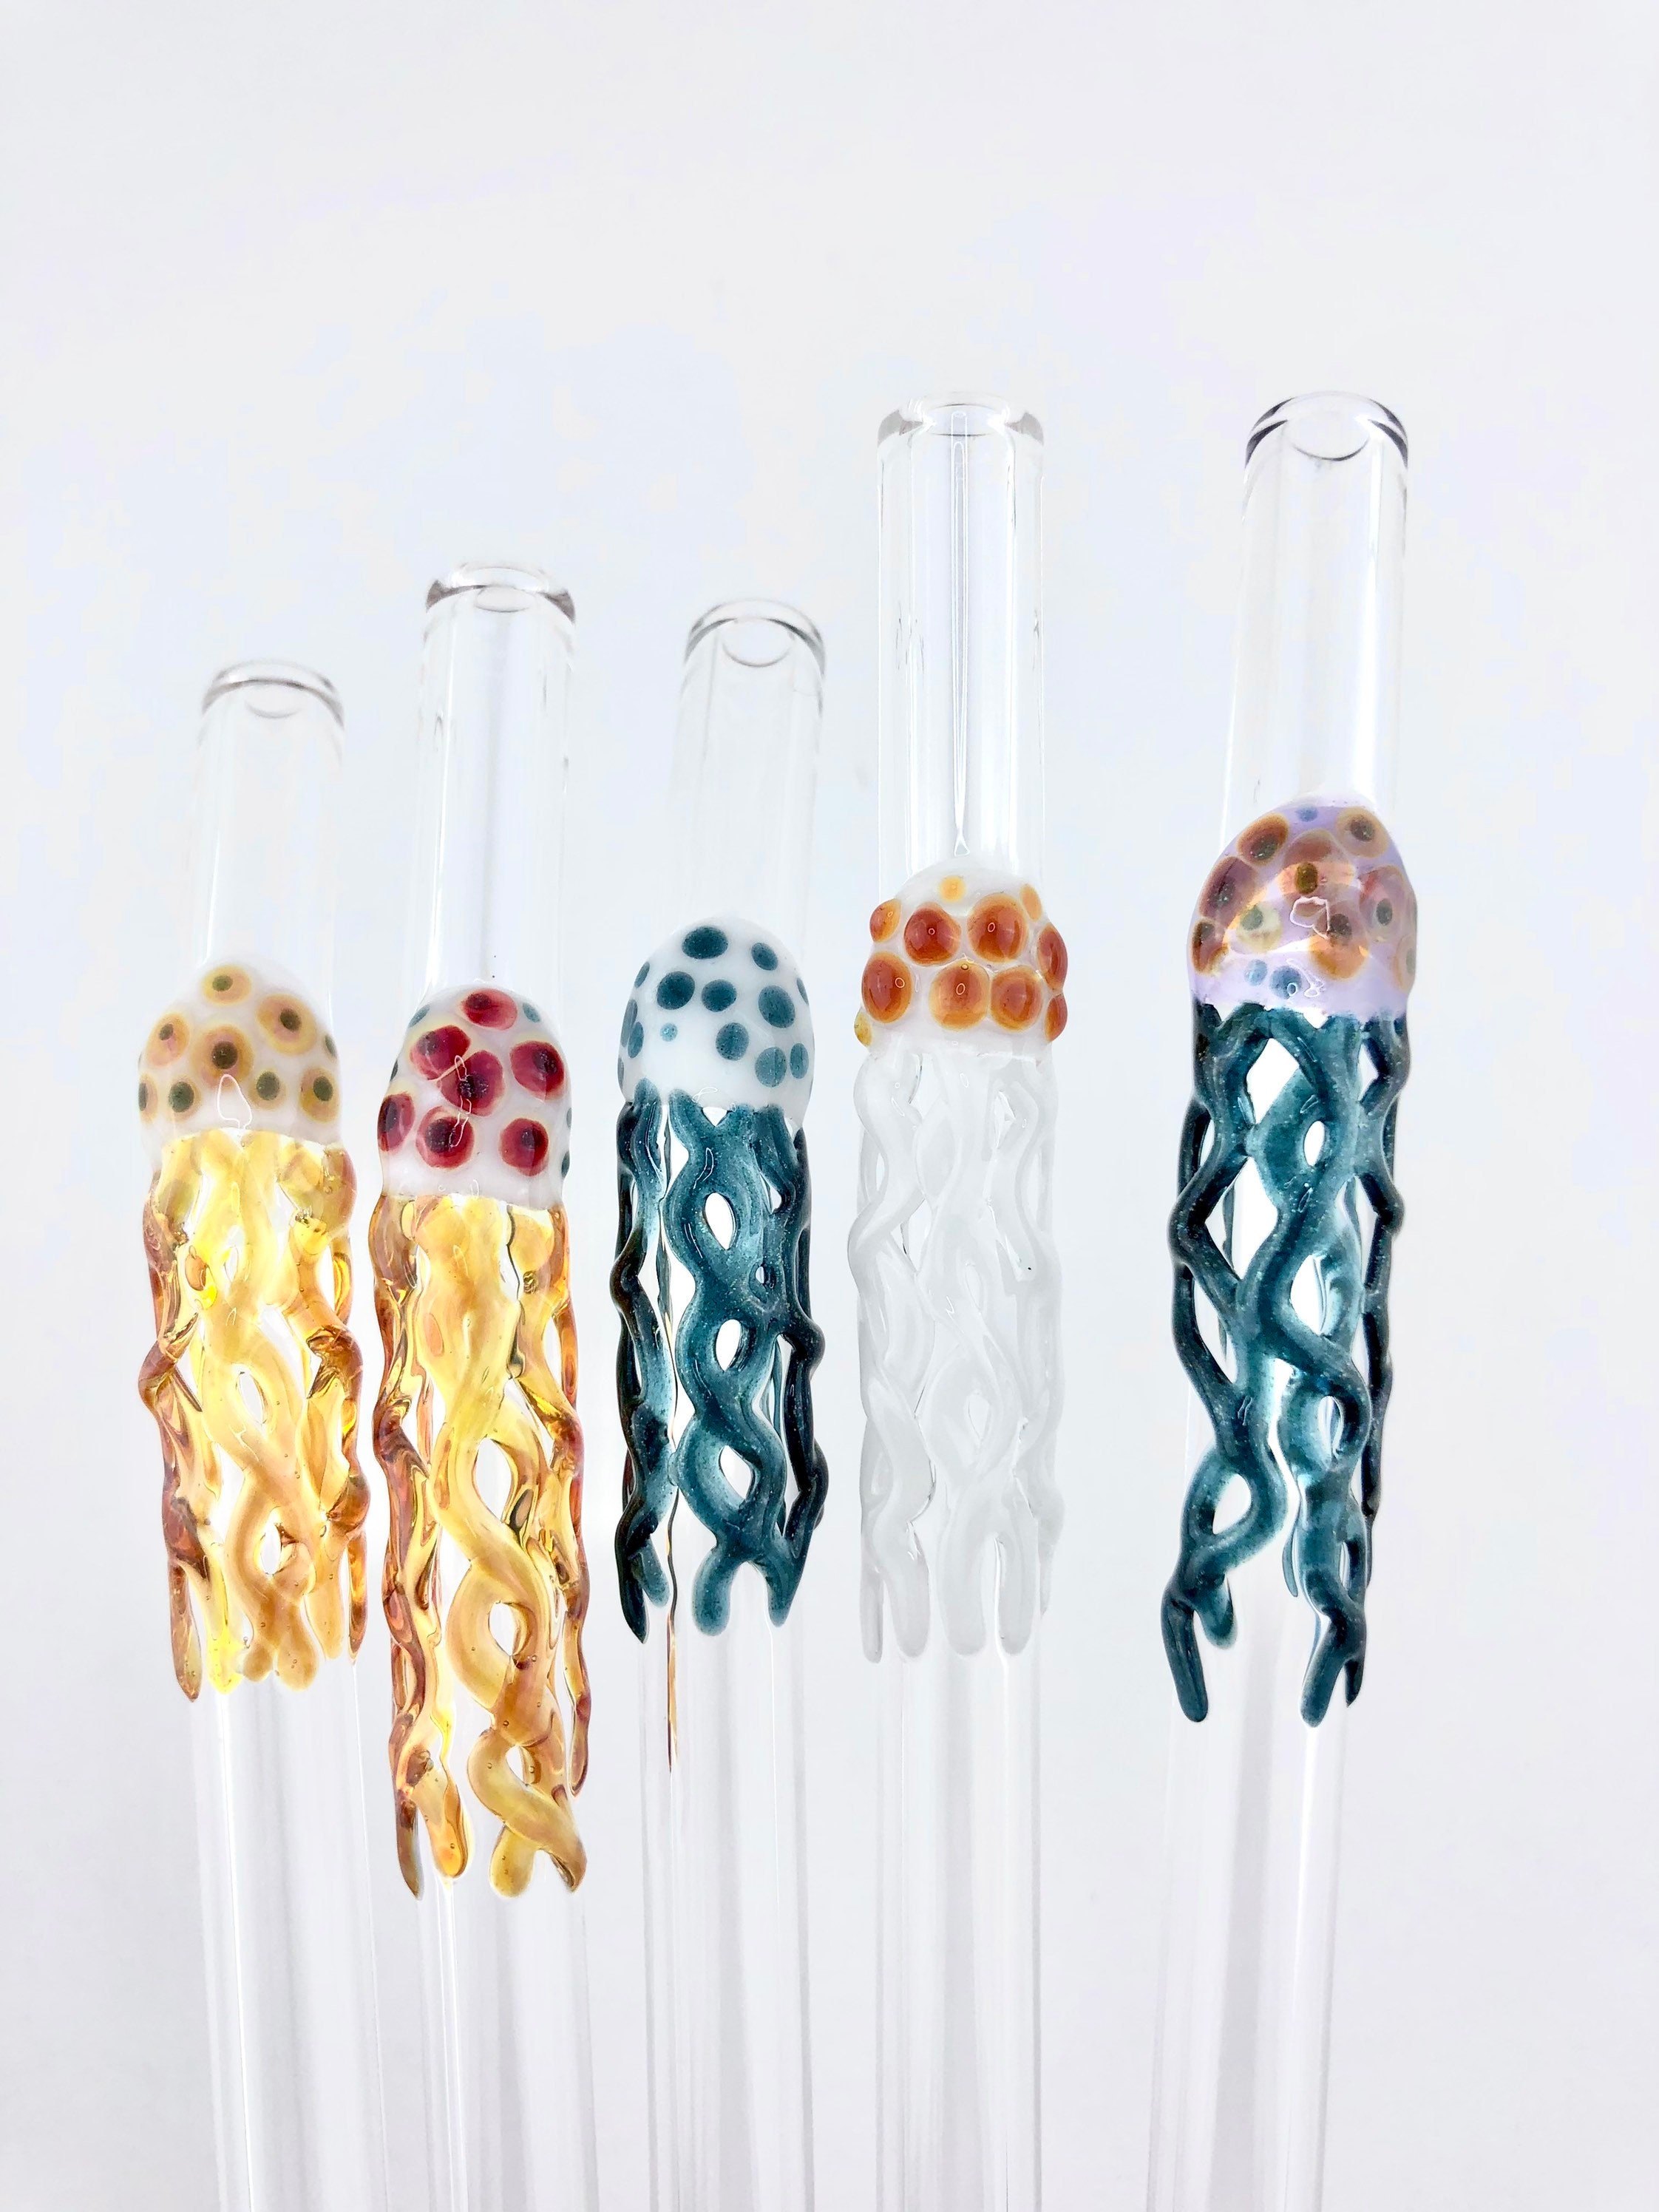 4 Pieces Glass Boba Straws Reusable Glass Drinking Straws Wide Clear Straws  12mm Clear Smoothie Straws